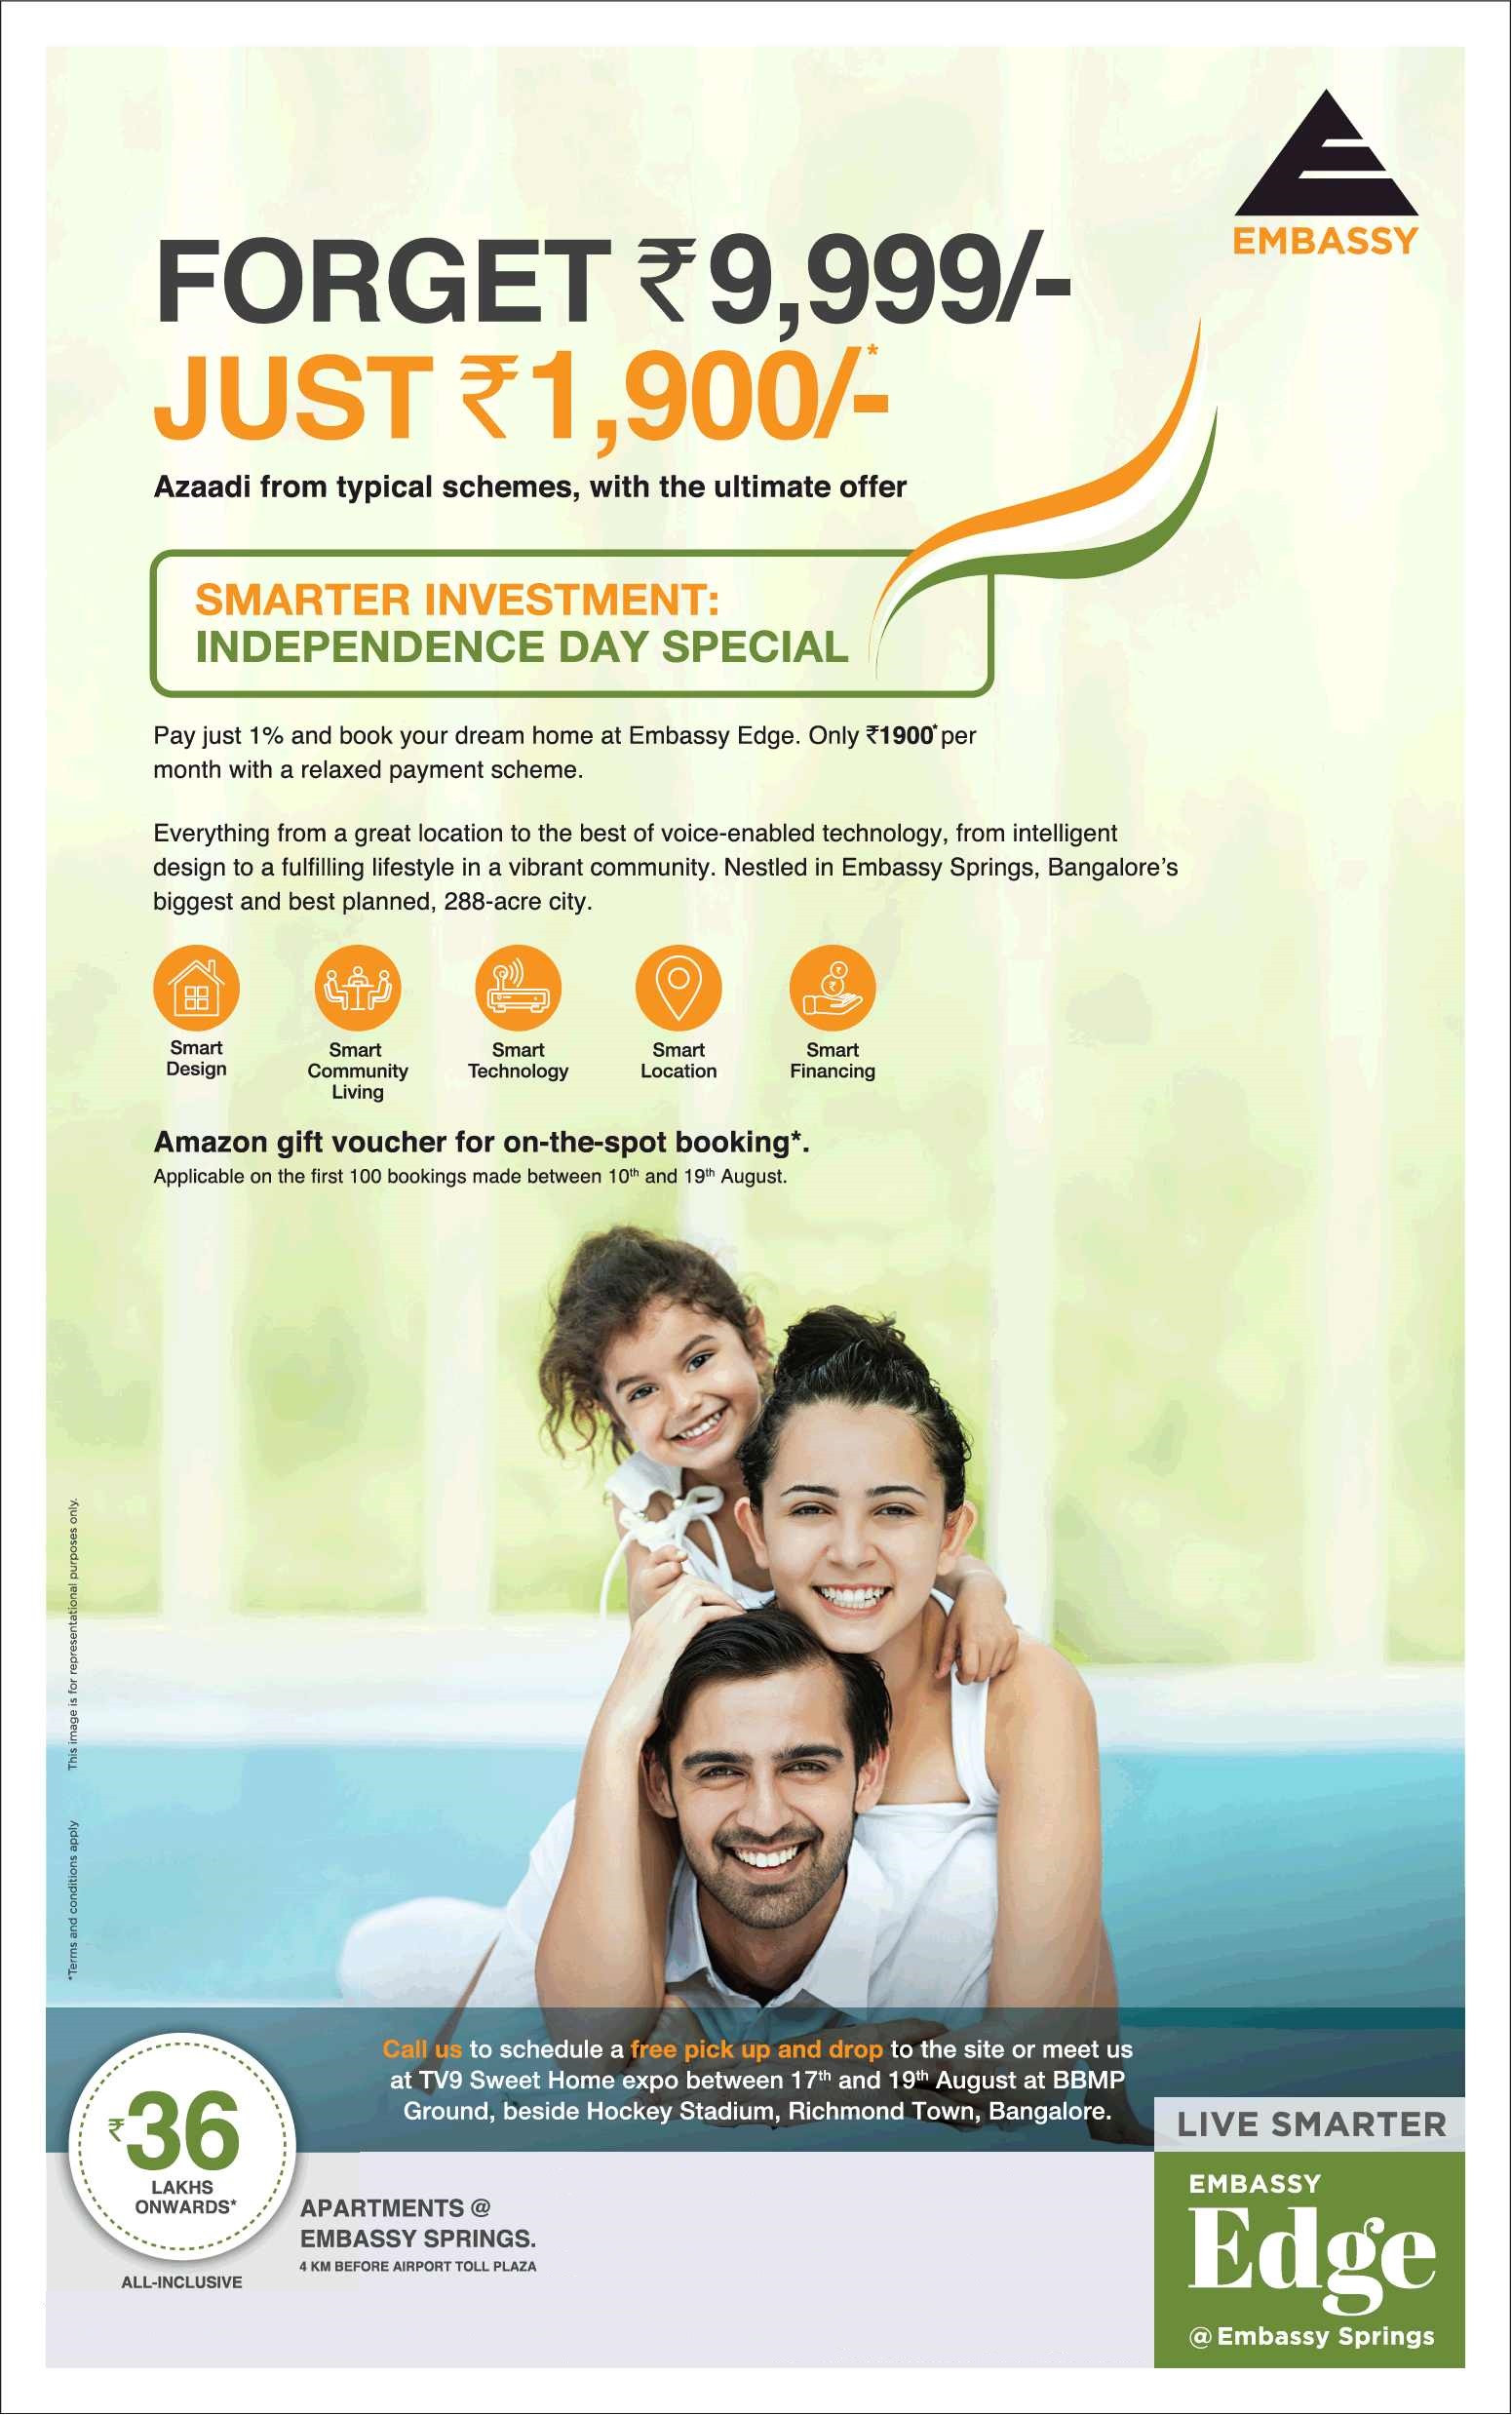 Pay just 1% & book your dream home at Embassy Edge in Bangalore